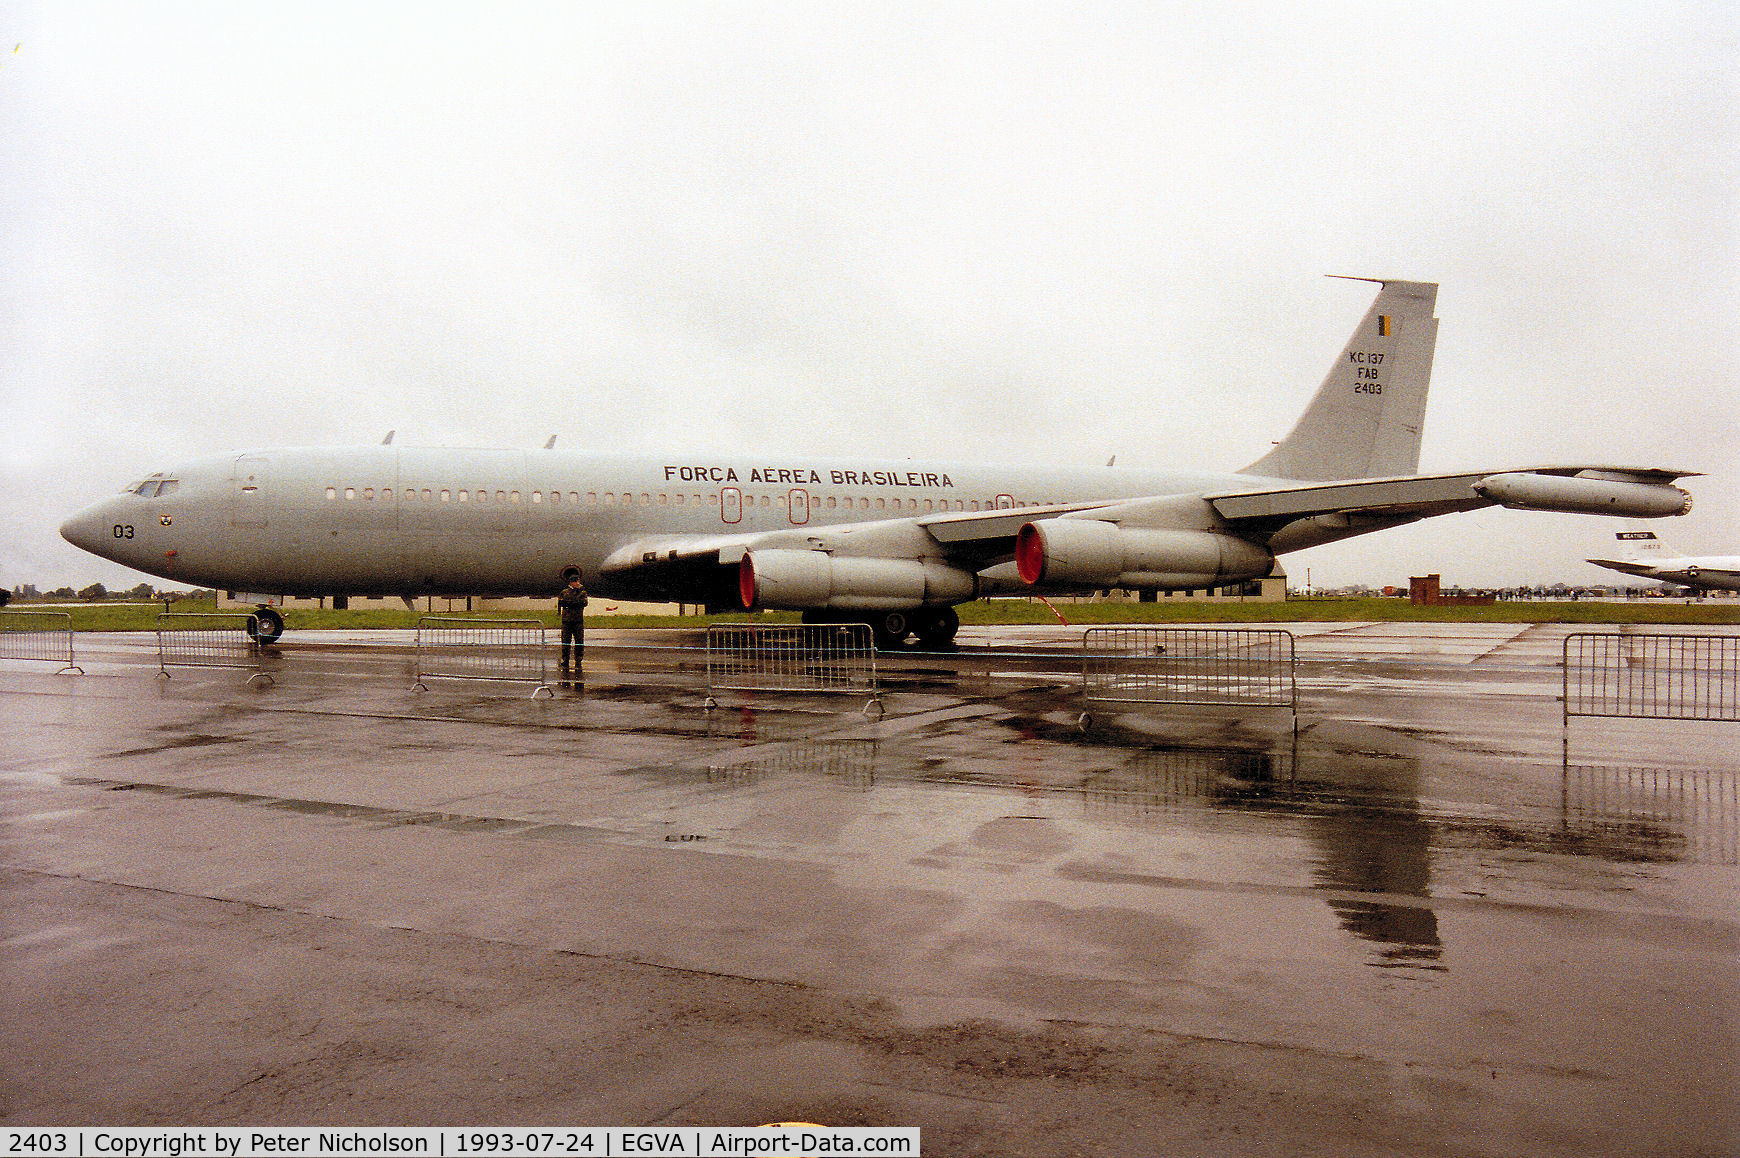 2403, 1969 Boeing KC-137 C/N 20008, KC-137 of 2nd Transport Group of the Brazilian Air Force on display at the 1993 Intnl Air Tattoo at RAF Fairford.